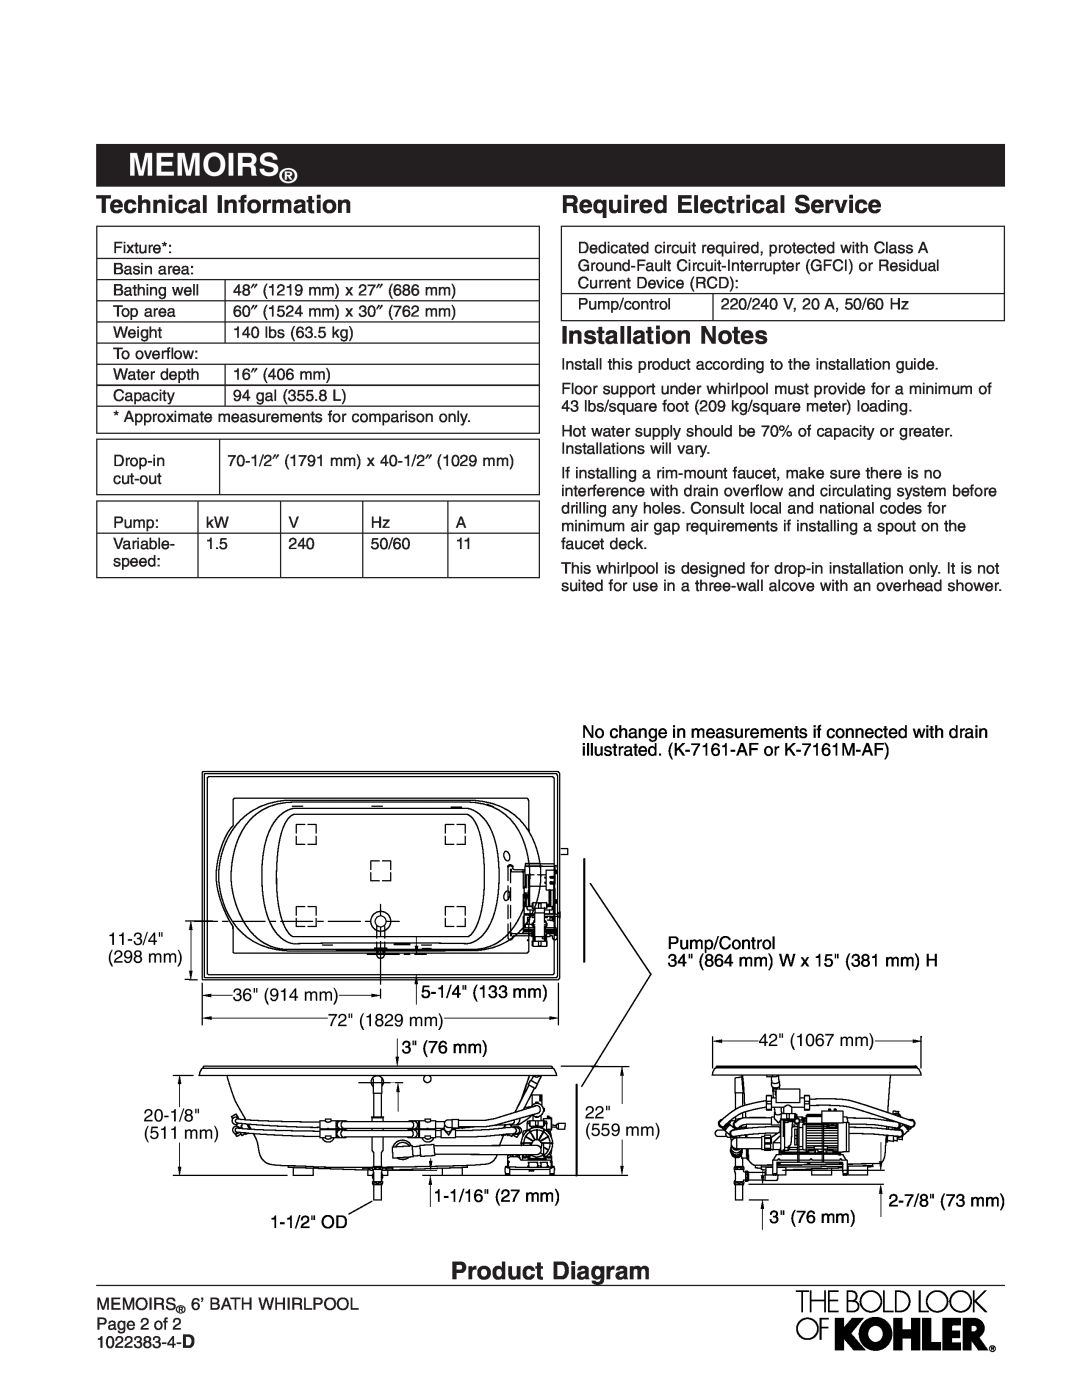 Kohler K-1418-H2 manual Technical Information, Required Electrical Service, Installation Notes, Product Diagram, Memoirs 